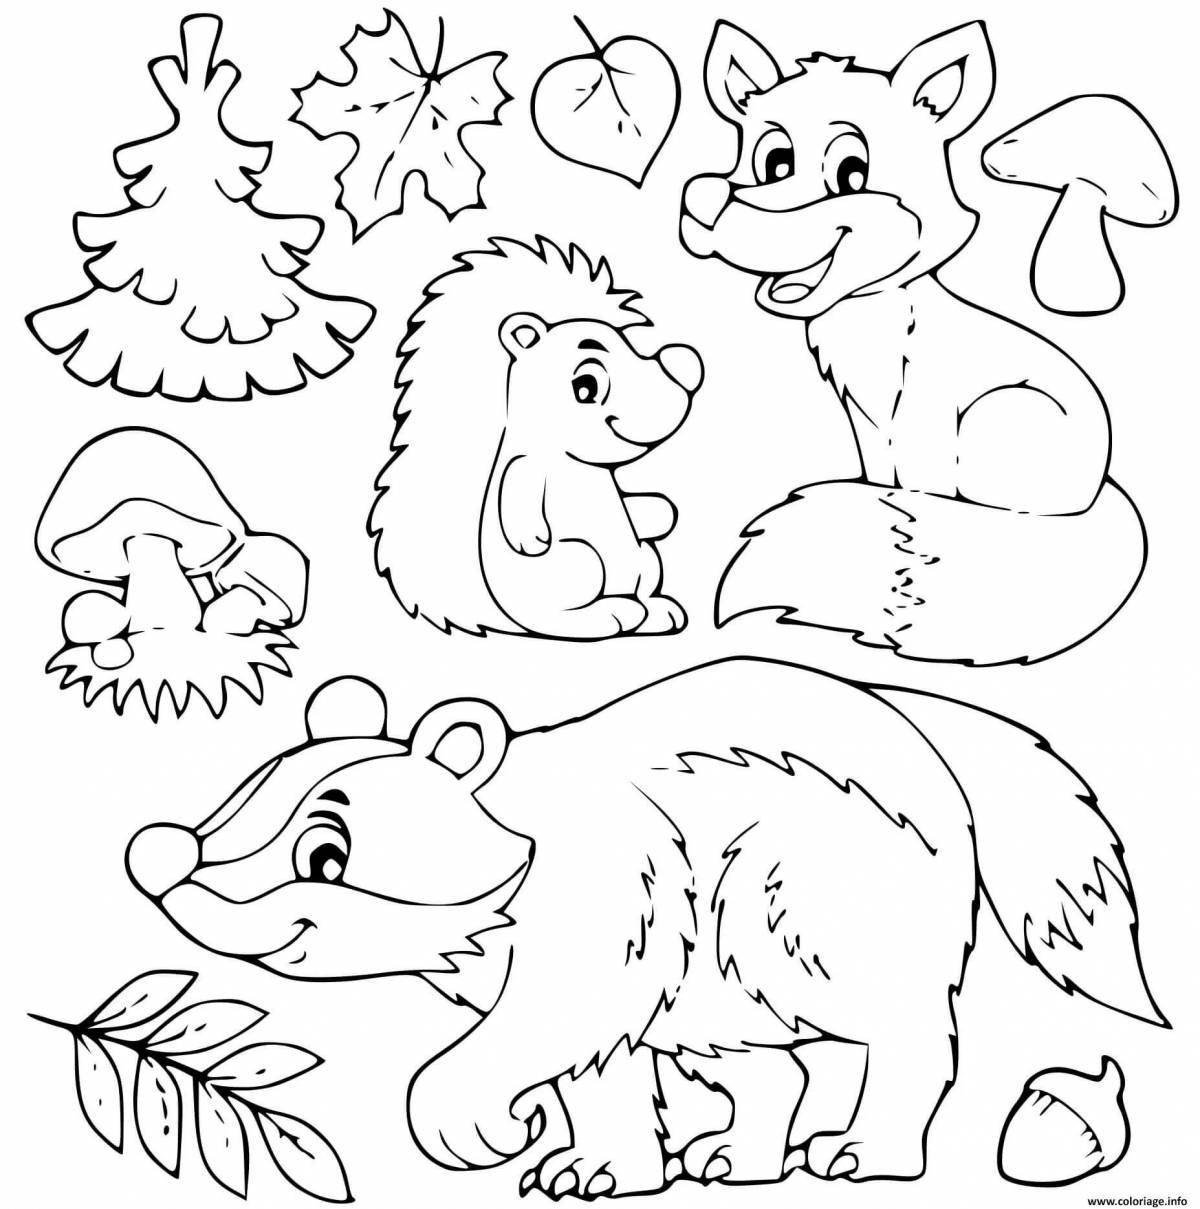 Funny forest animals coloring pages for preschoolers